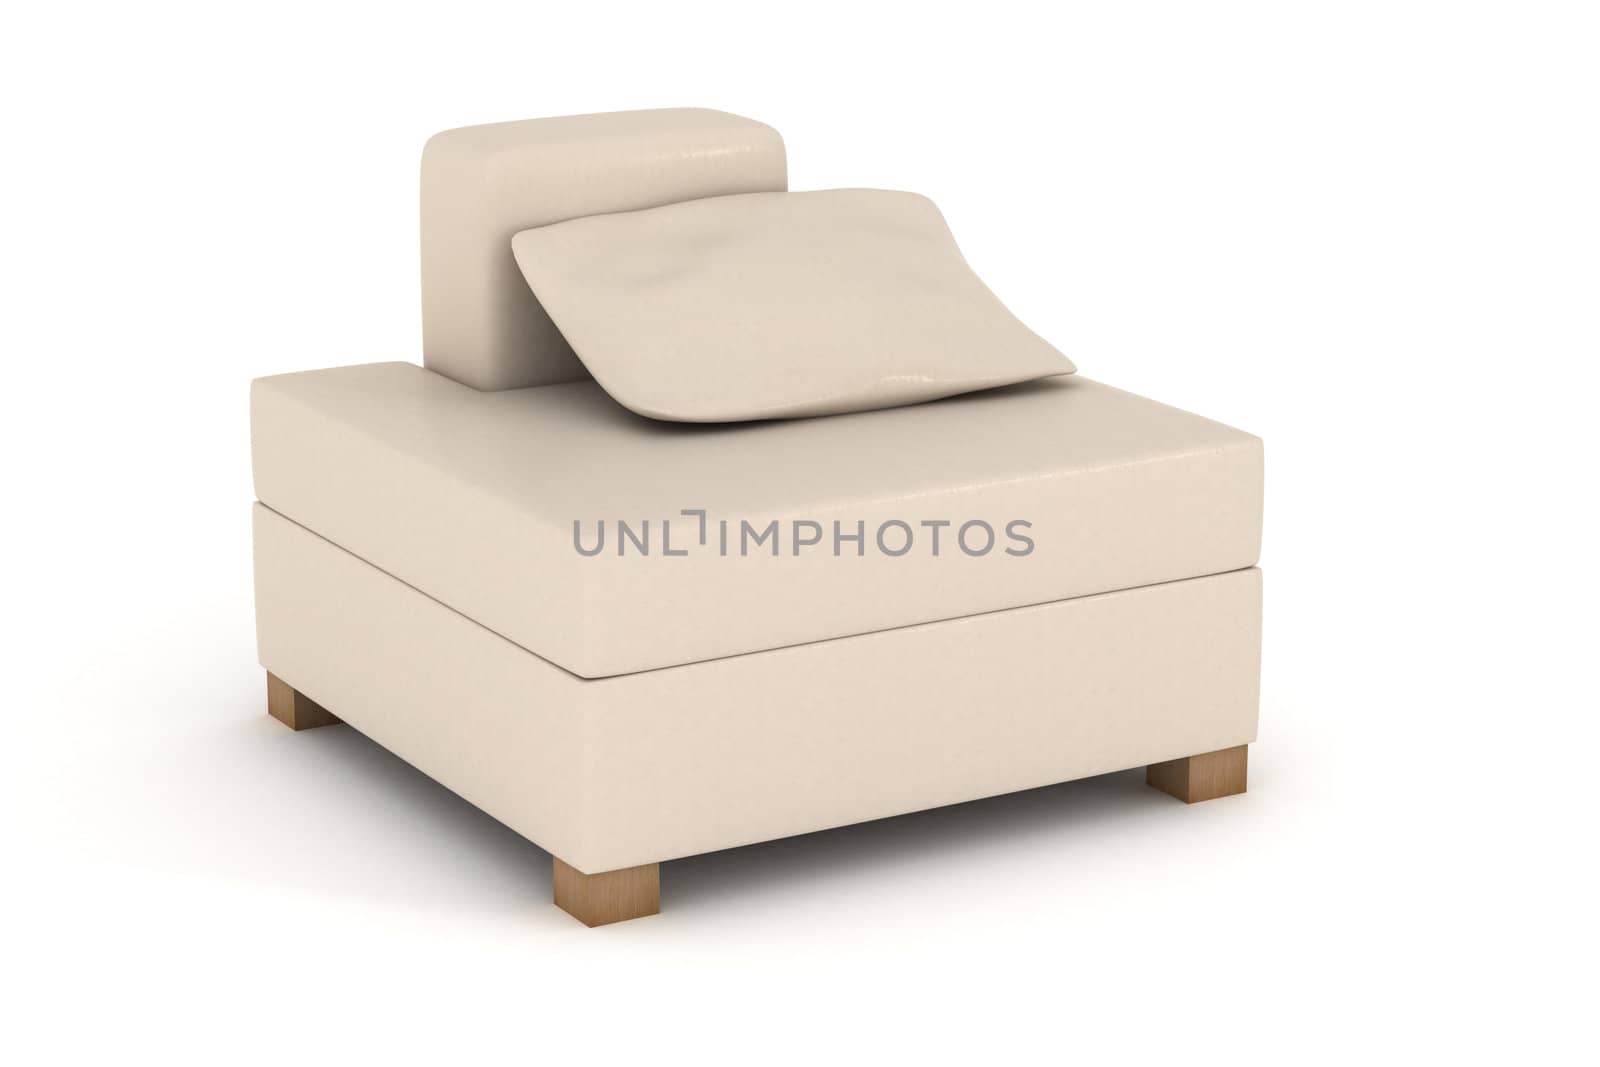 Soft armchair on a white background. 3D image.